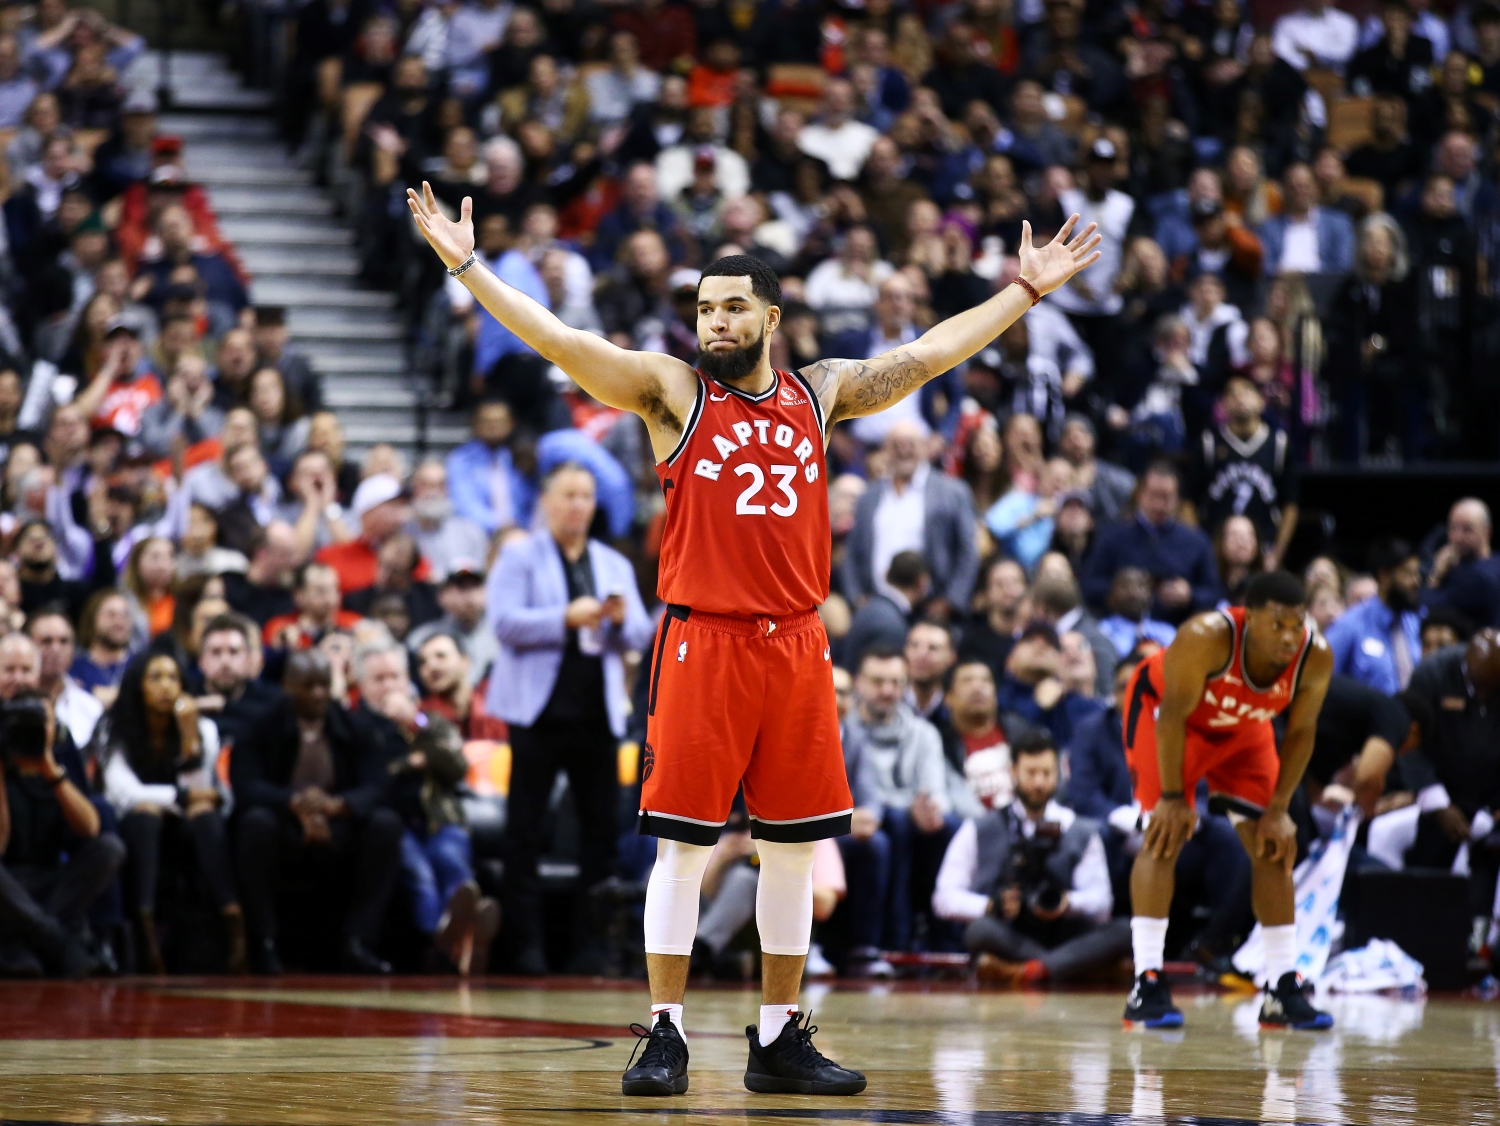 Fred VanVleet etches his name in NBA history books by agreeing to sign an $85 million contract extension with the Toronto Raptors.